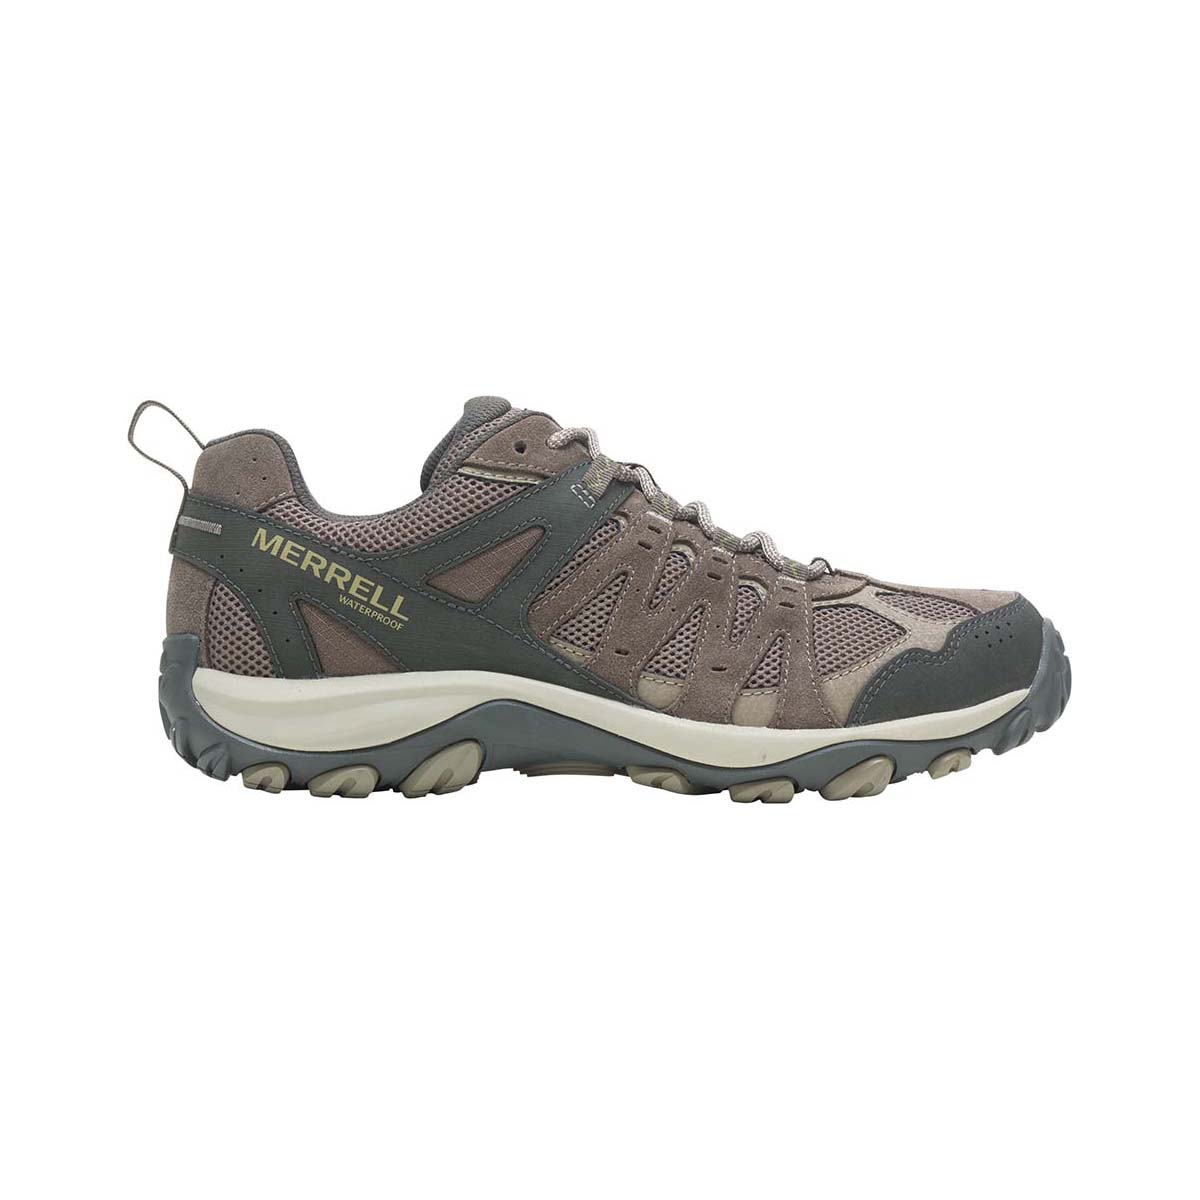 Merrell Accentor 3 Men's Low WP Hiking Boots Boulder 13